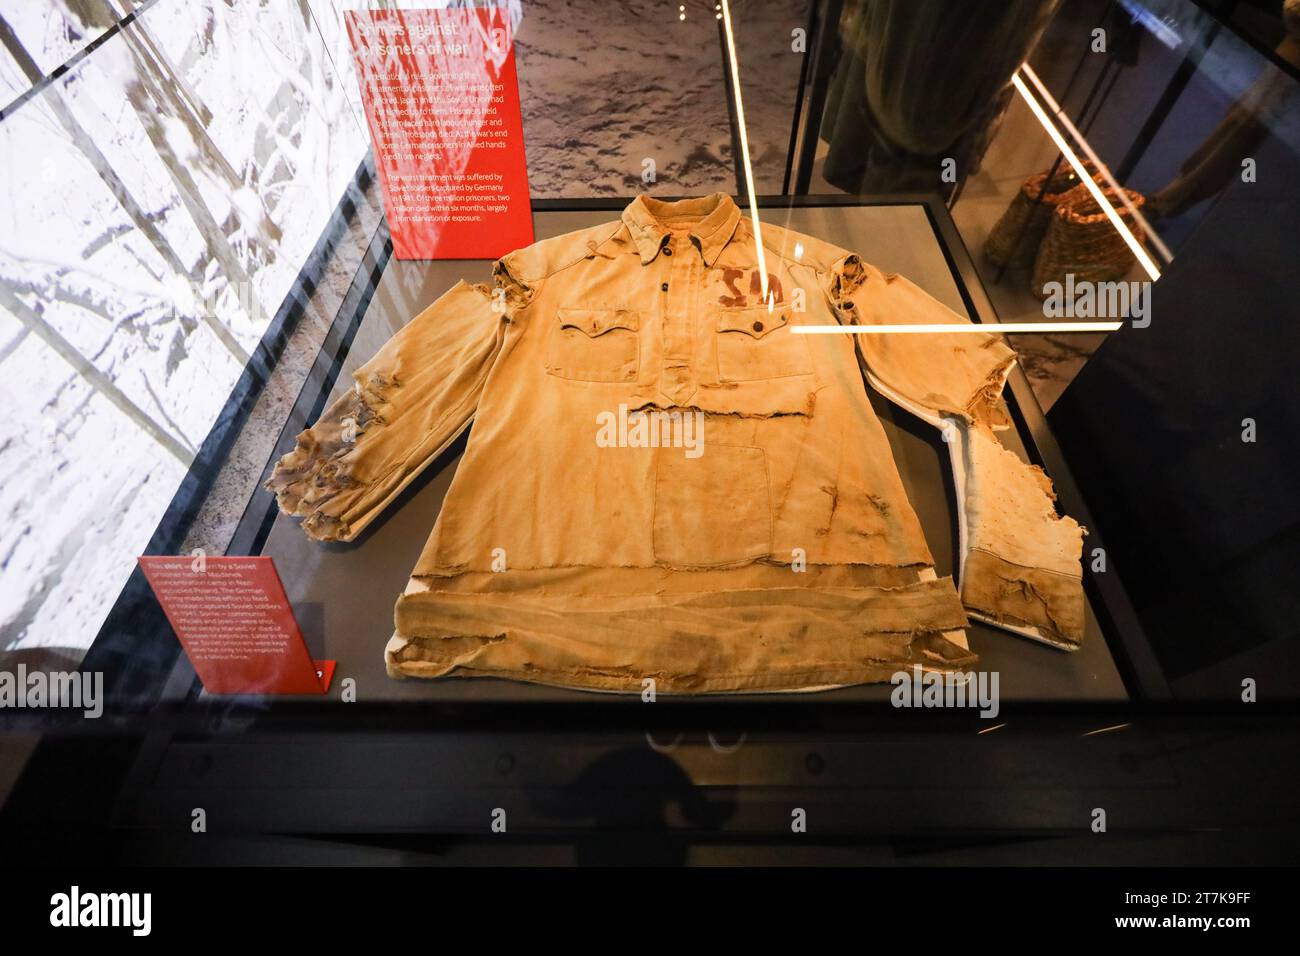 Uniform worn by Soviet prisoner in Majdanek concentration camp in Poland, on display at Imperial War Museum, London Stock Photo